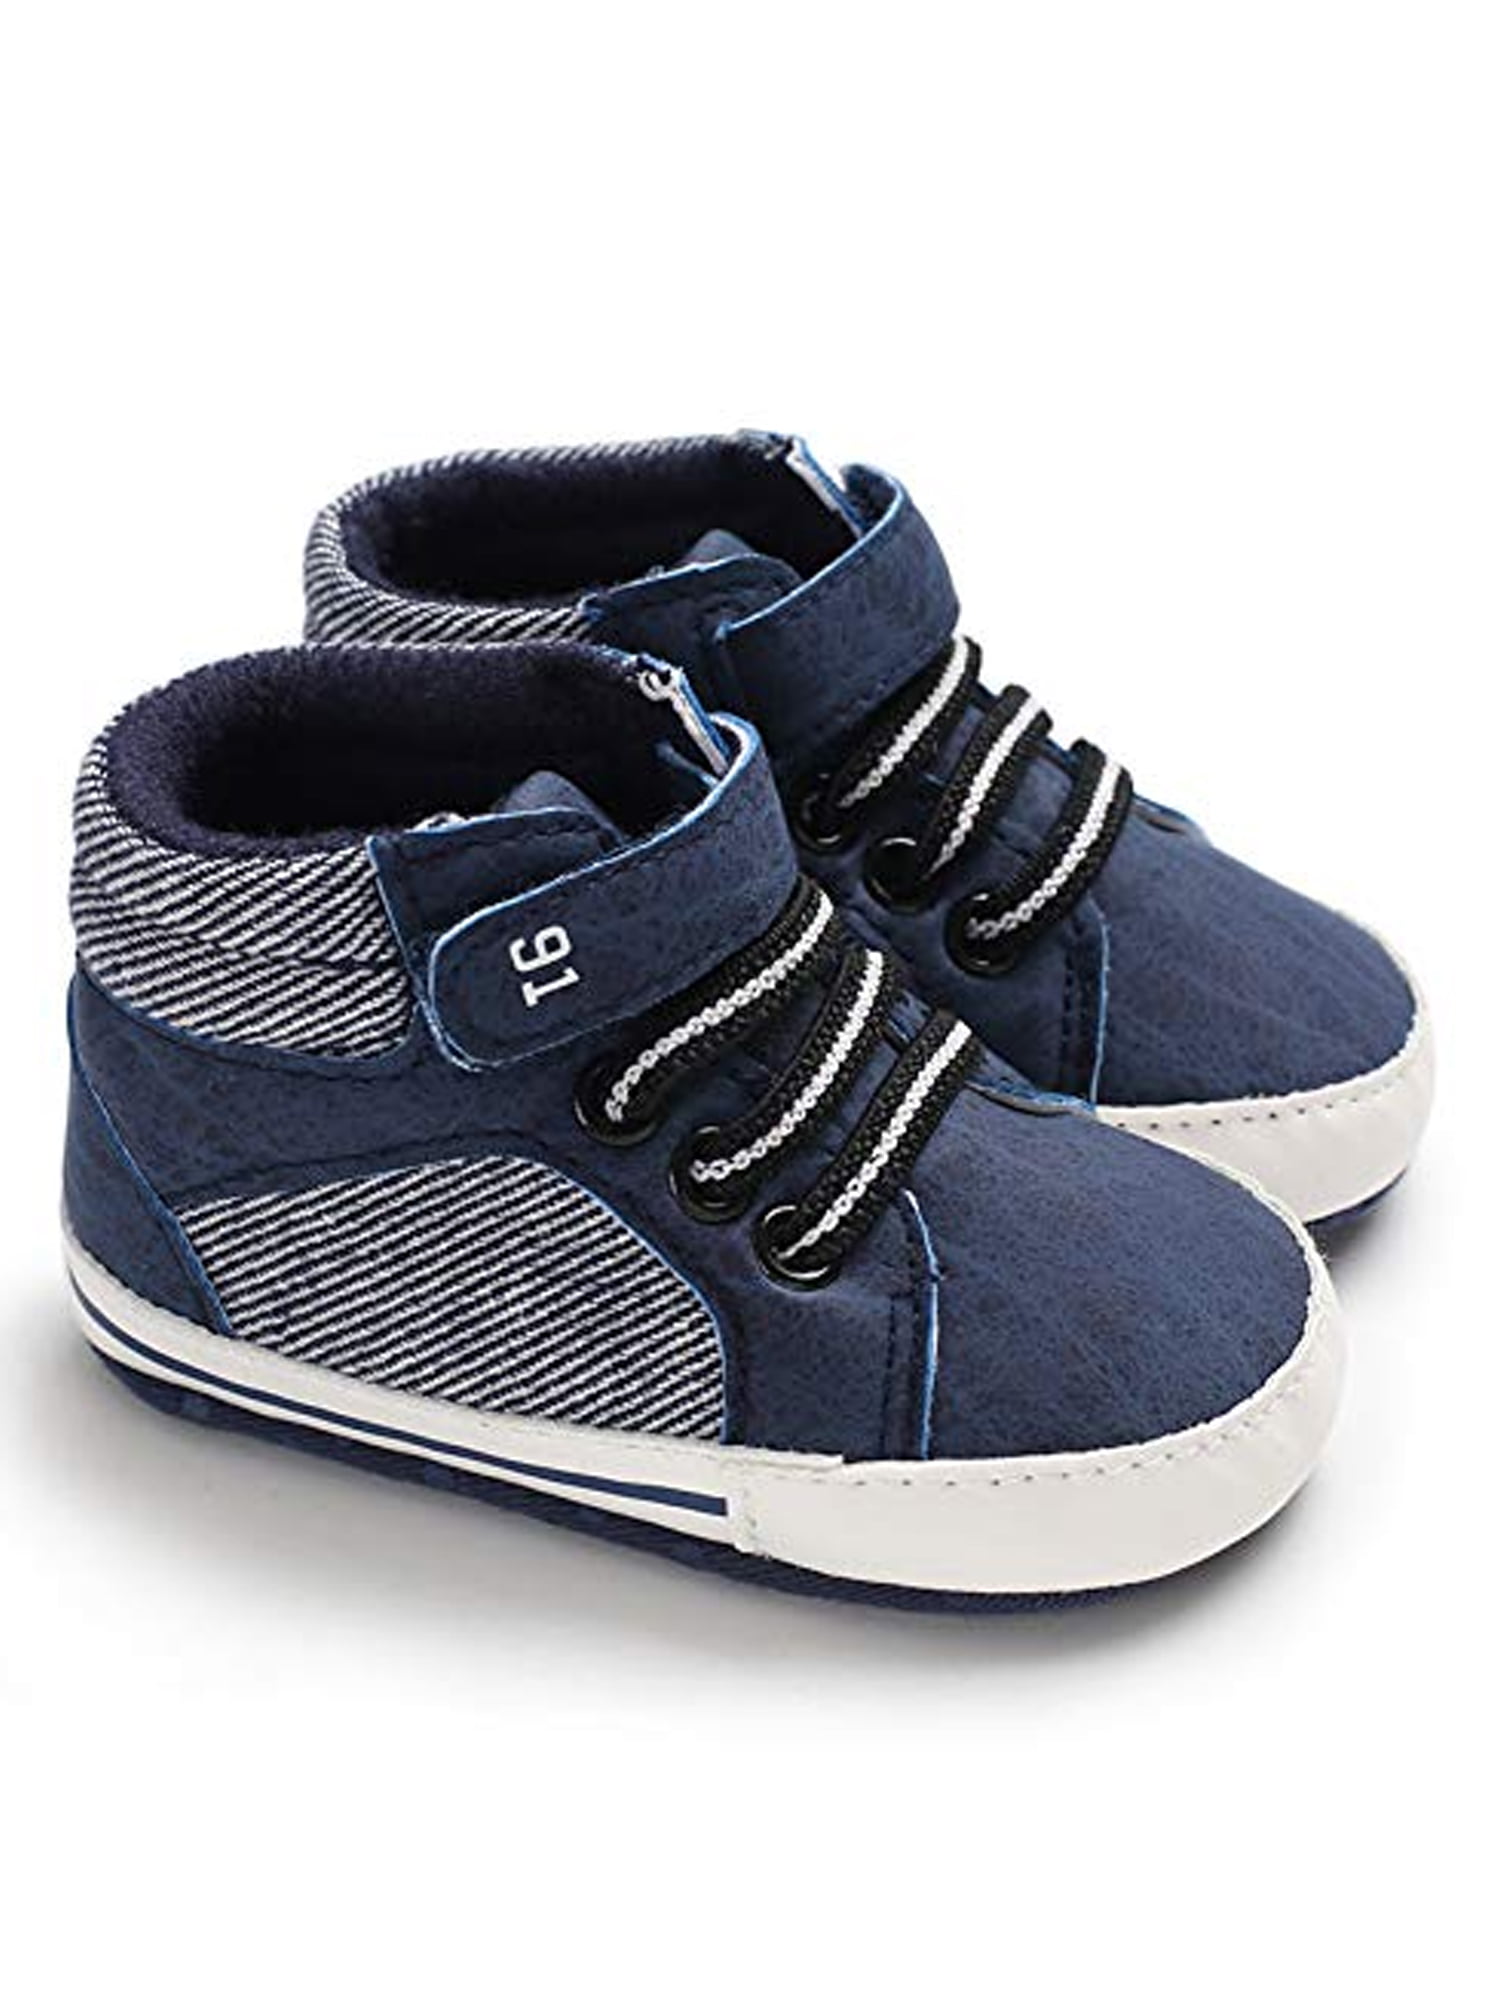 DEELIN Baby Boys Shoes,Unisex Baby Girls Shoes Canvas Sneakers Soft Sole Anti-Slip Crib Toddler Shoes Light Velcro Newborn Infant Baby Flats Shoes 